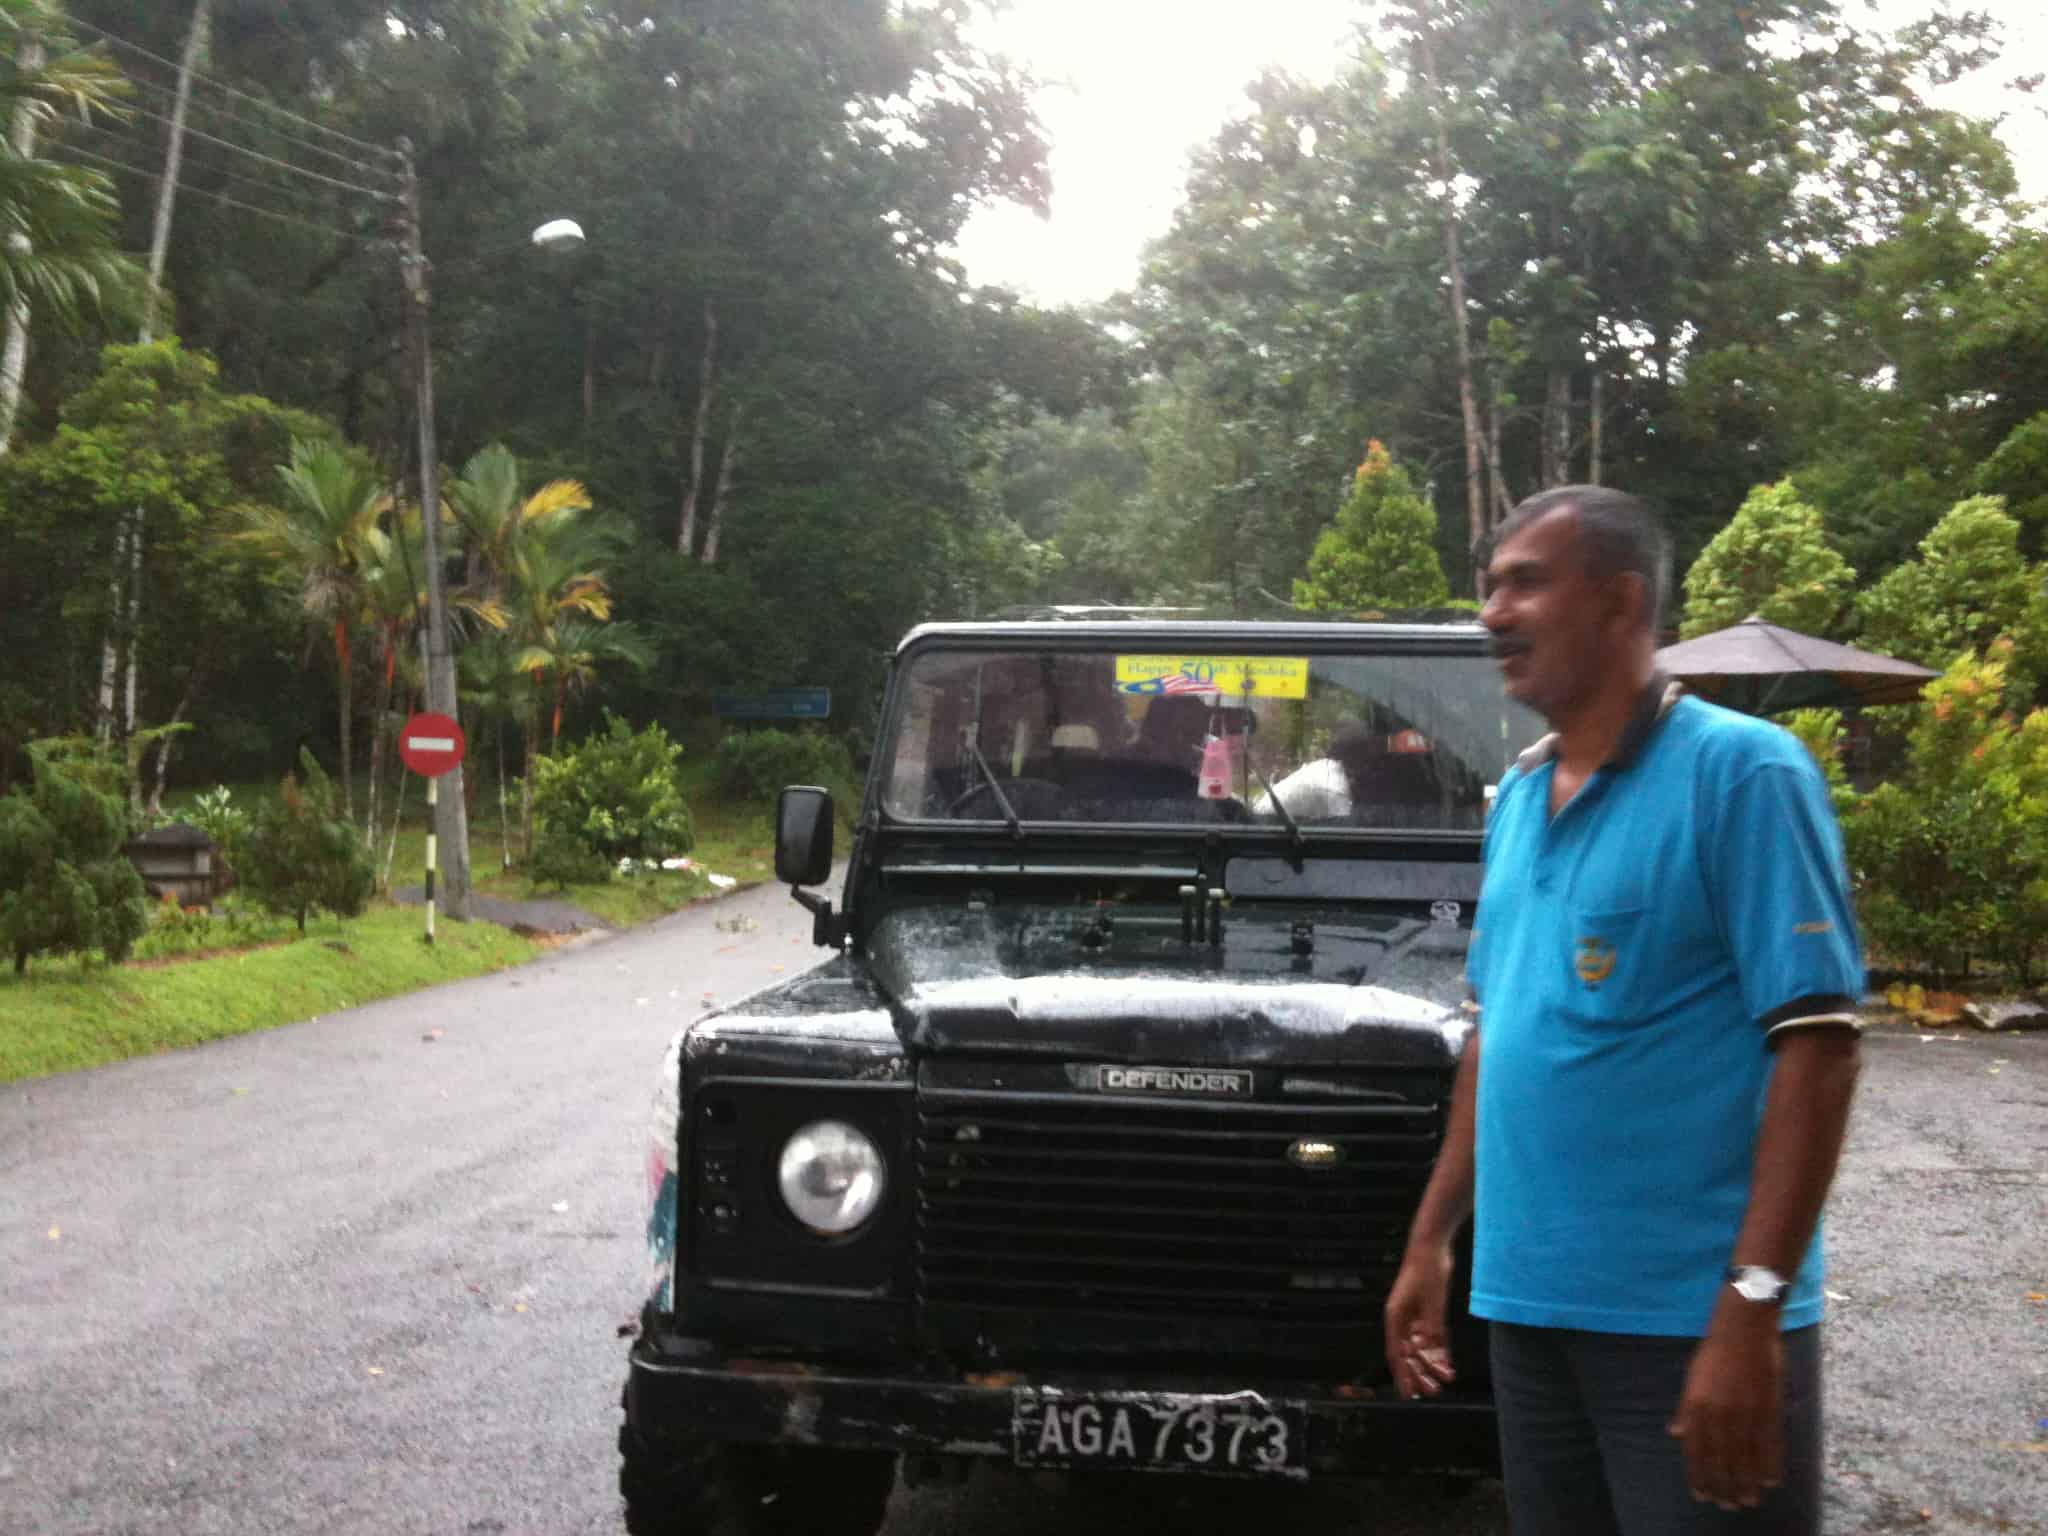 4-wheel drive up to Maxwell Hill